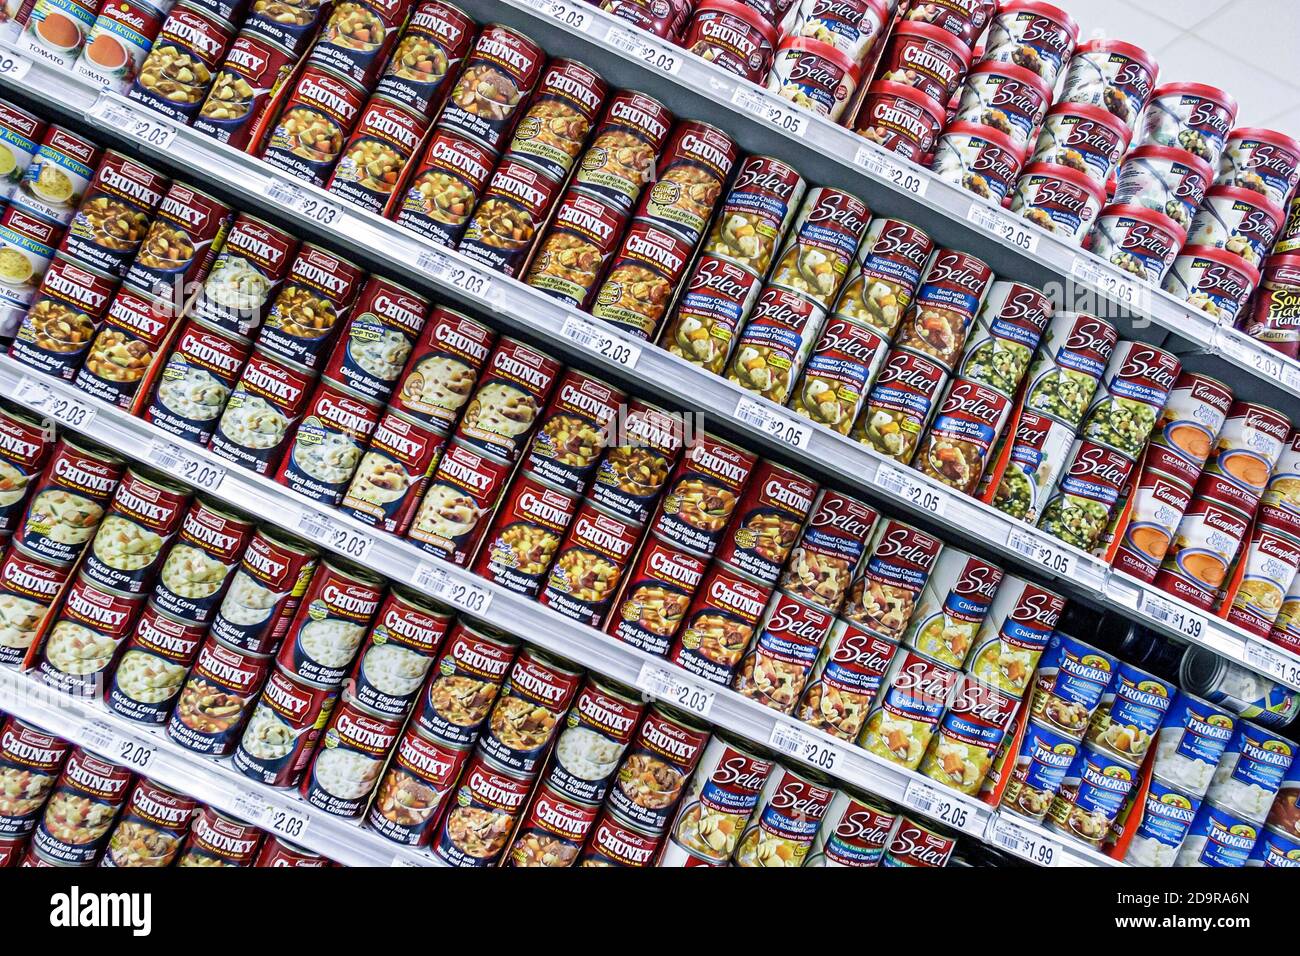 Miami Beach Florida,Publix Grocery Store groceries supermarket,shelves display sale soup cans Campbell's Chunky, Stock Photo